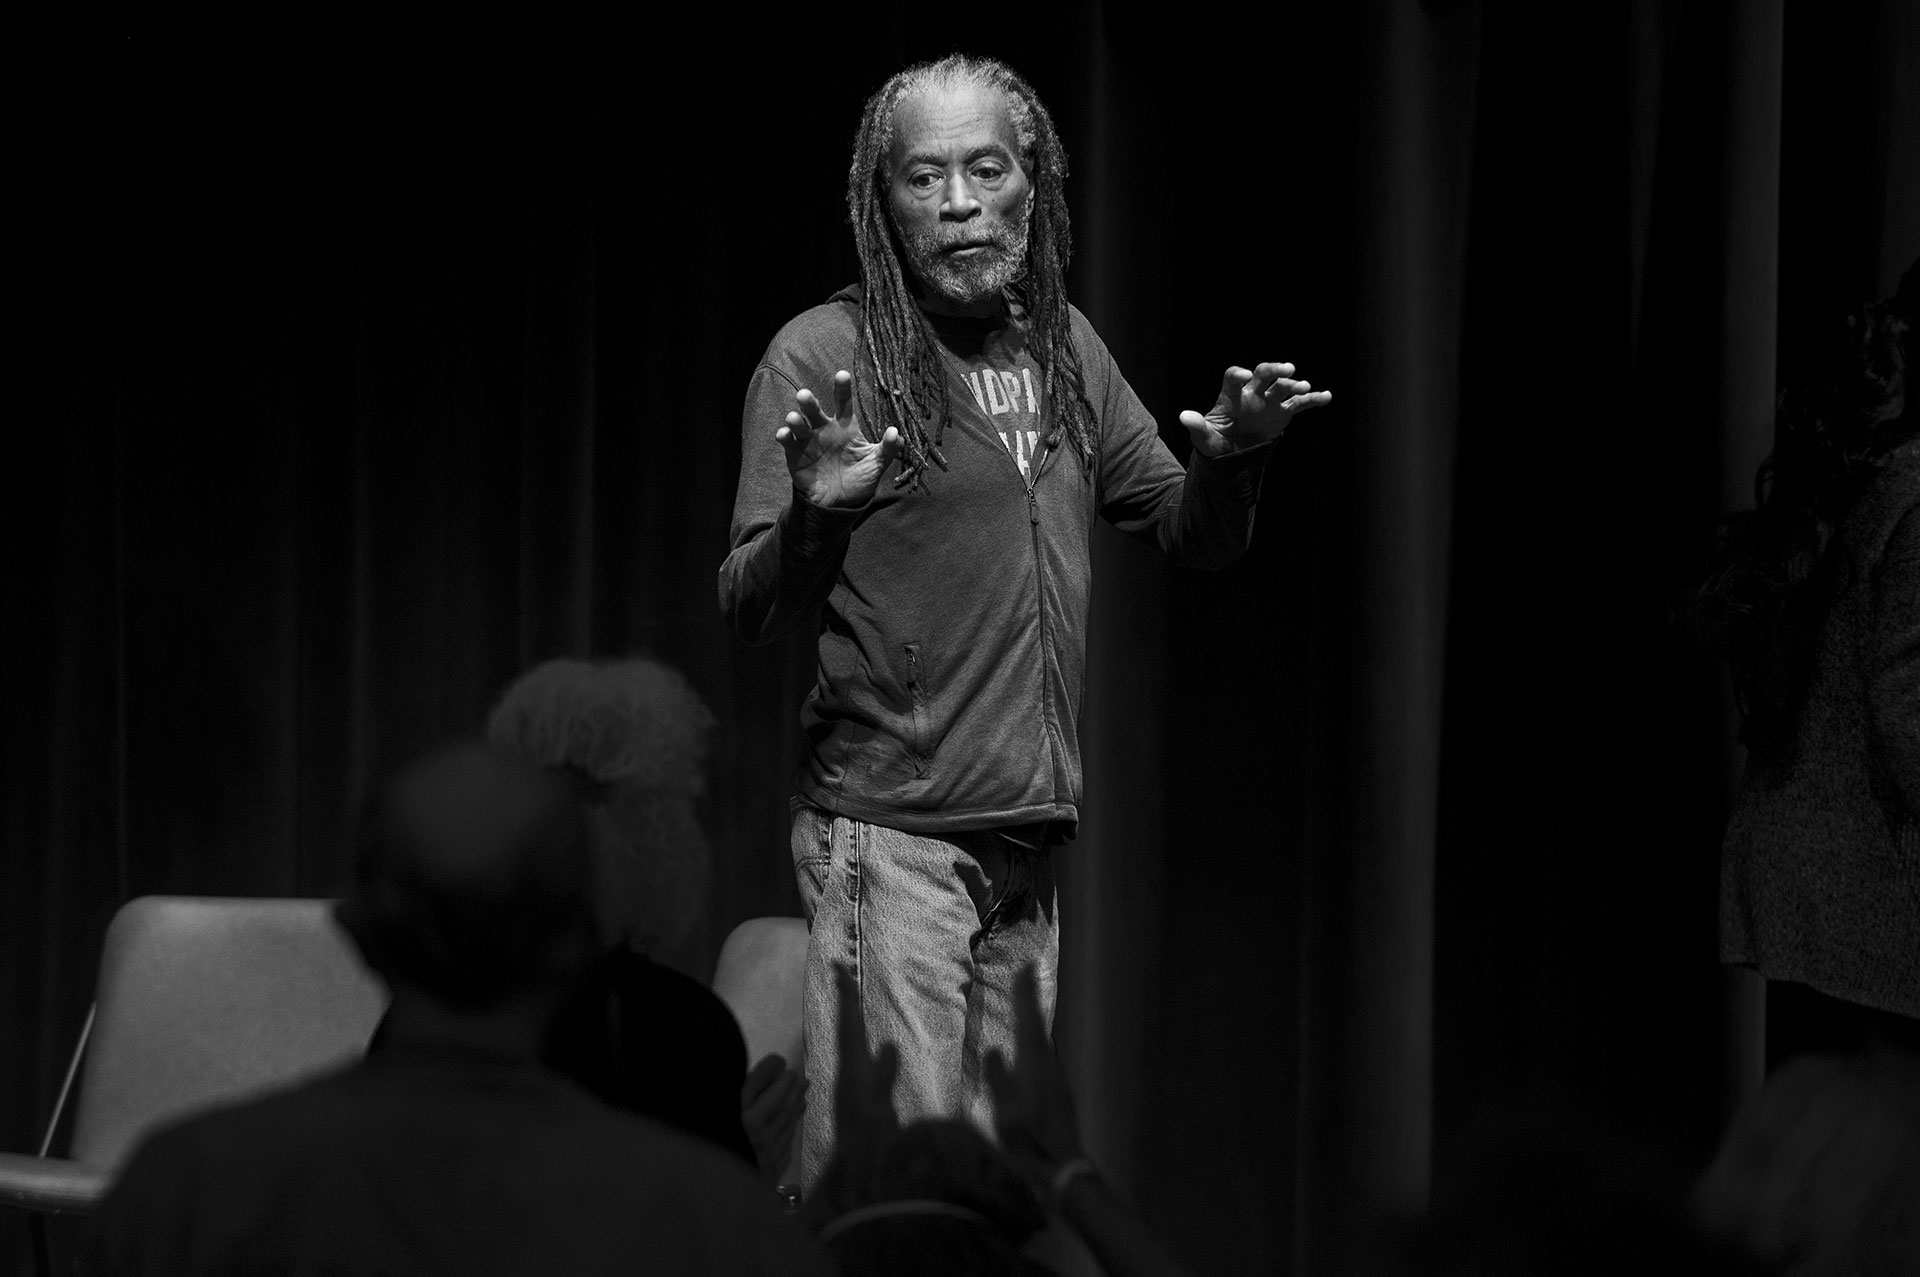 An African American man in a sweatshirt, jeans, and dreadlocks on stage. 